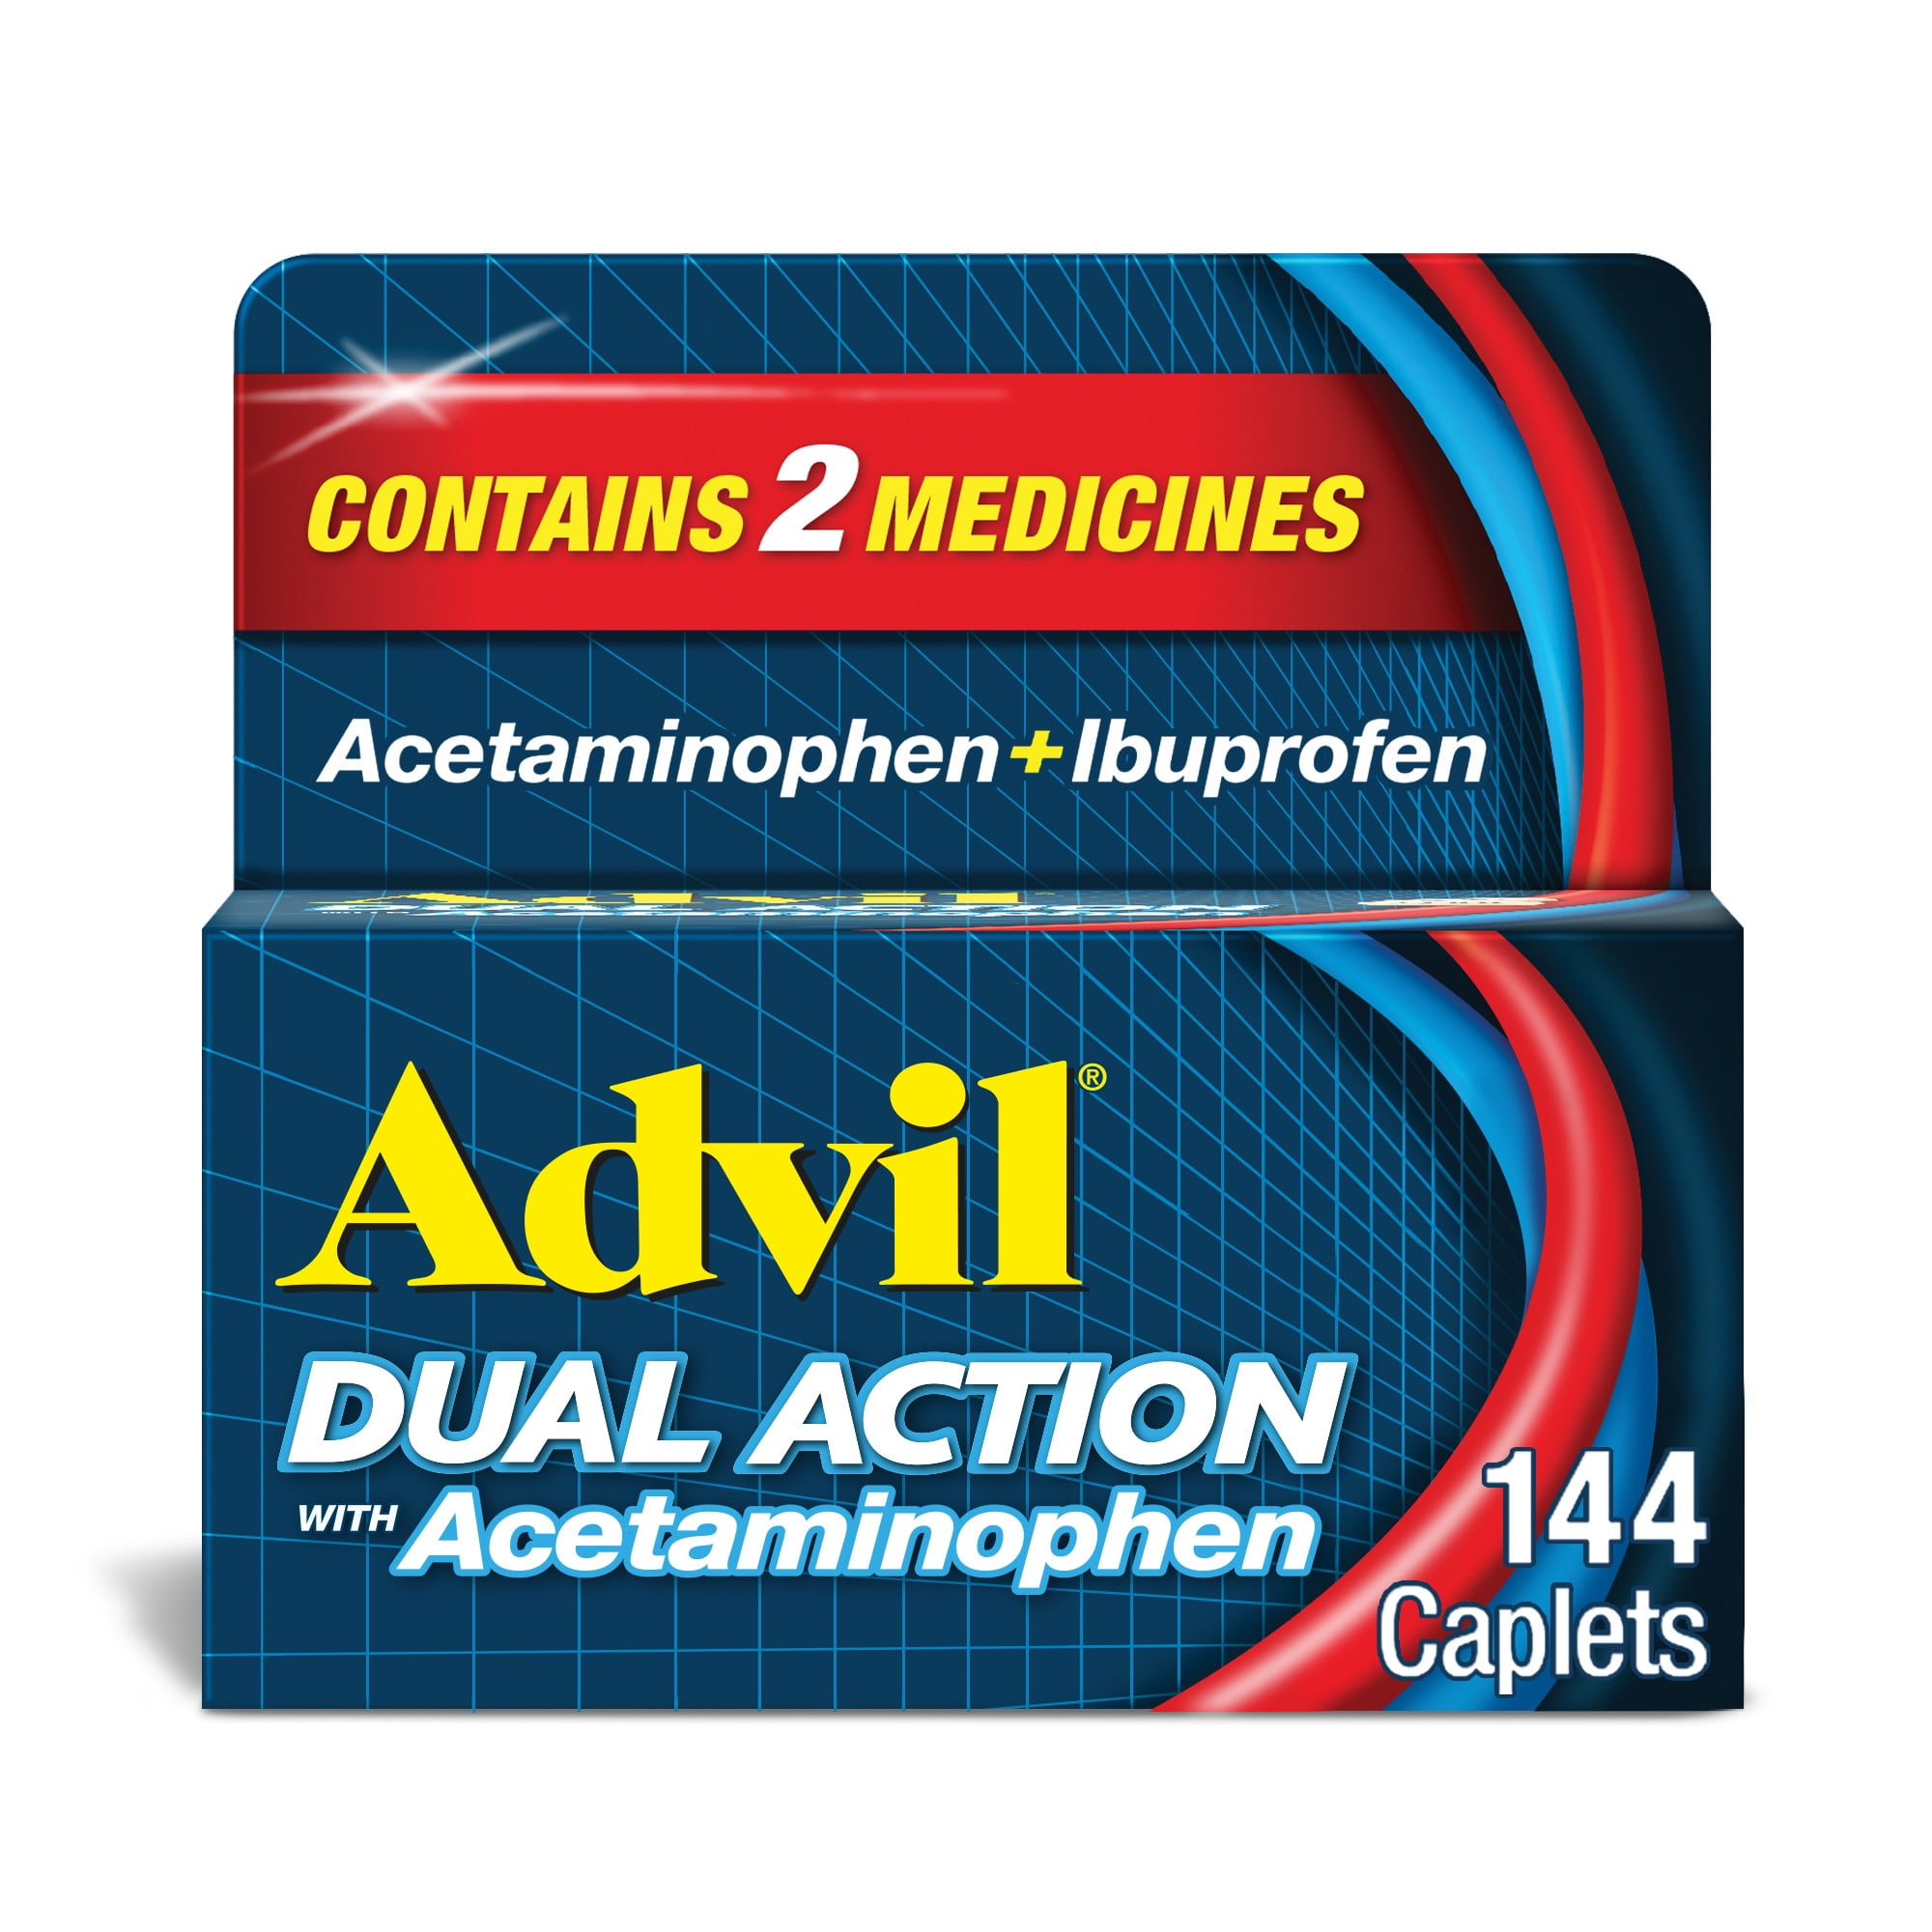 Advil Dual Action With Acetaminophen Pain and Headache Reliever Ibuprofen, Coated Caplets, 144 Count